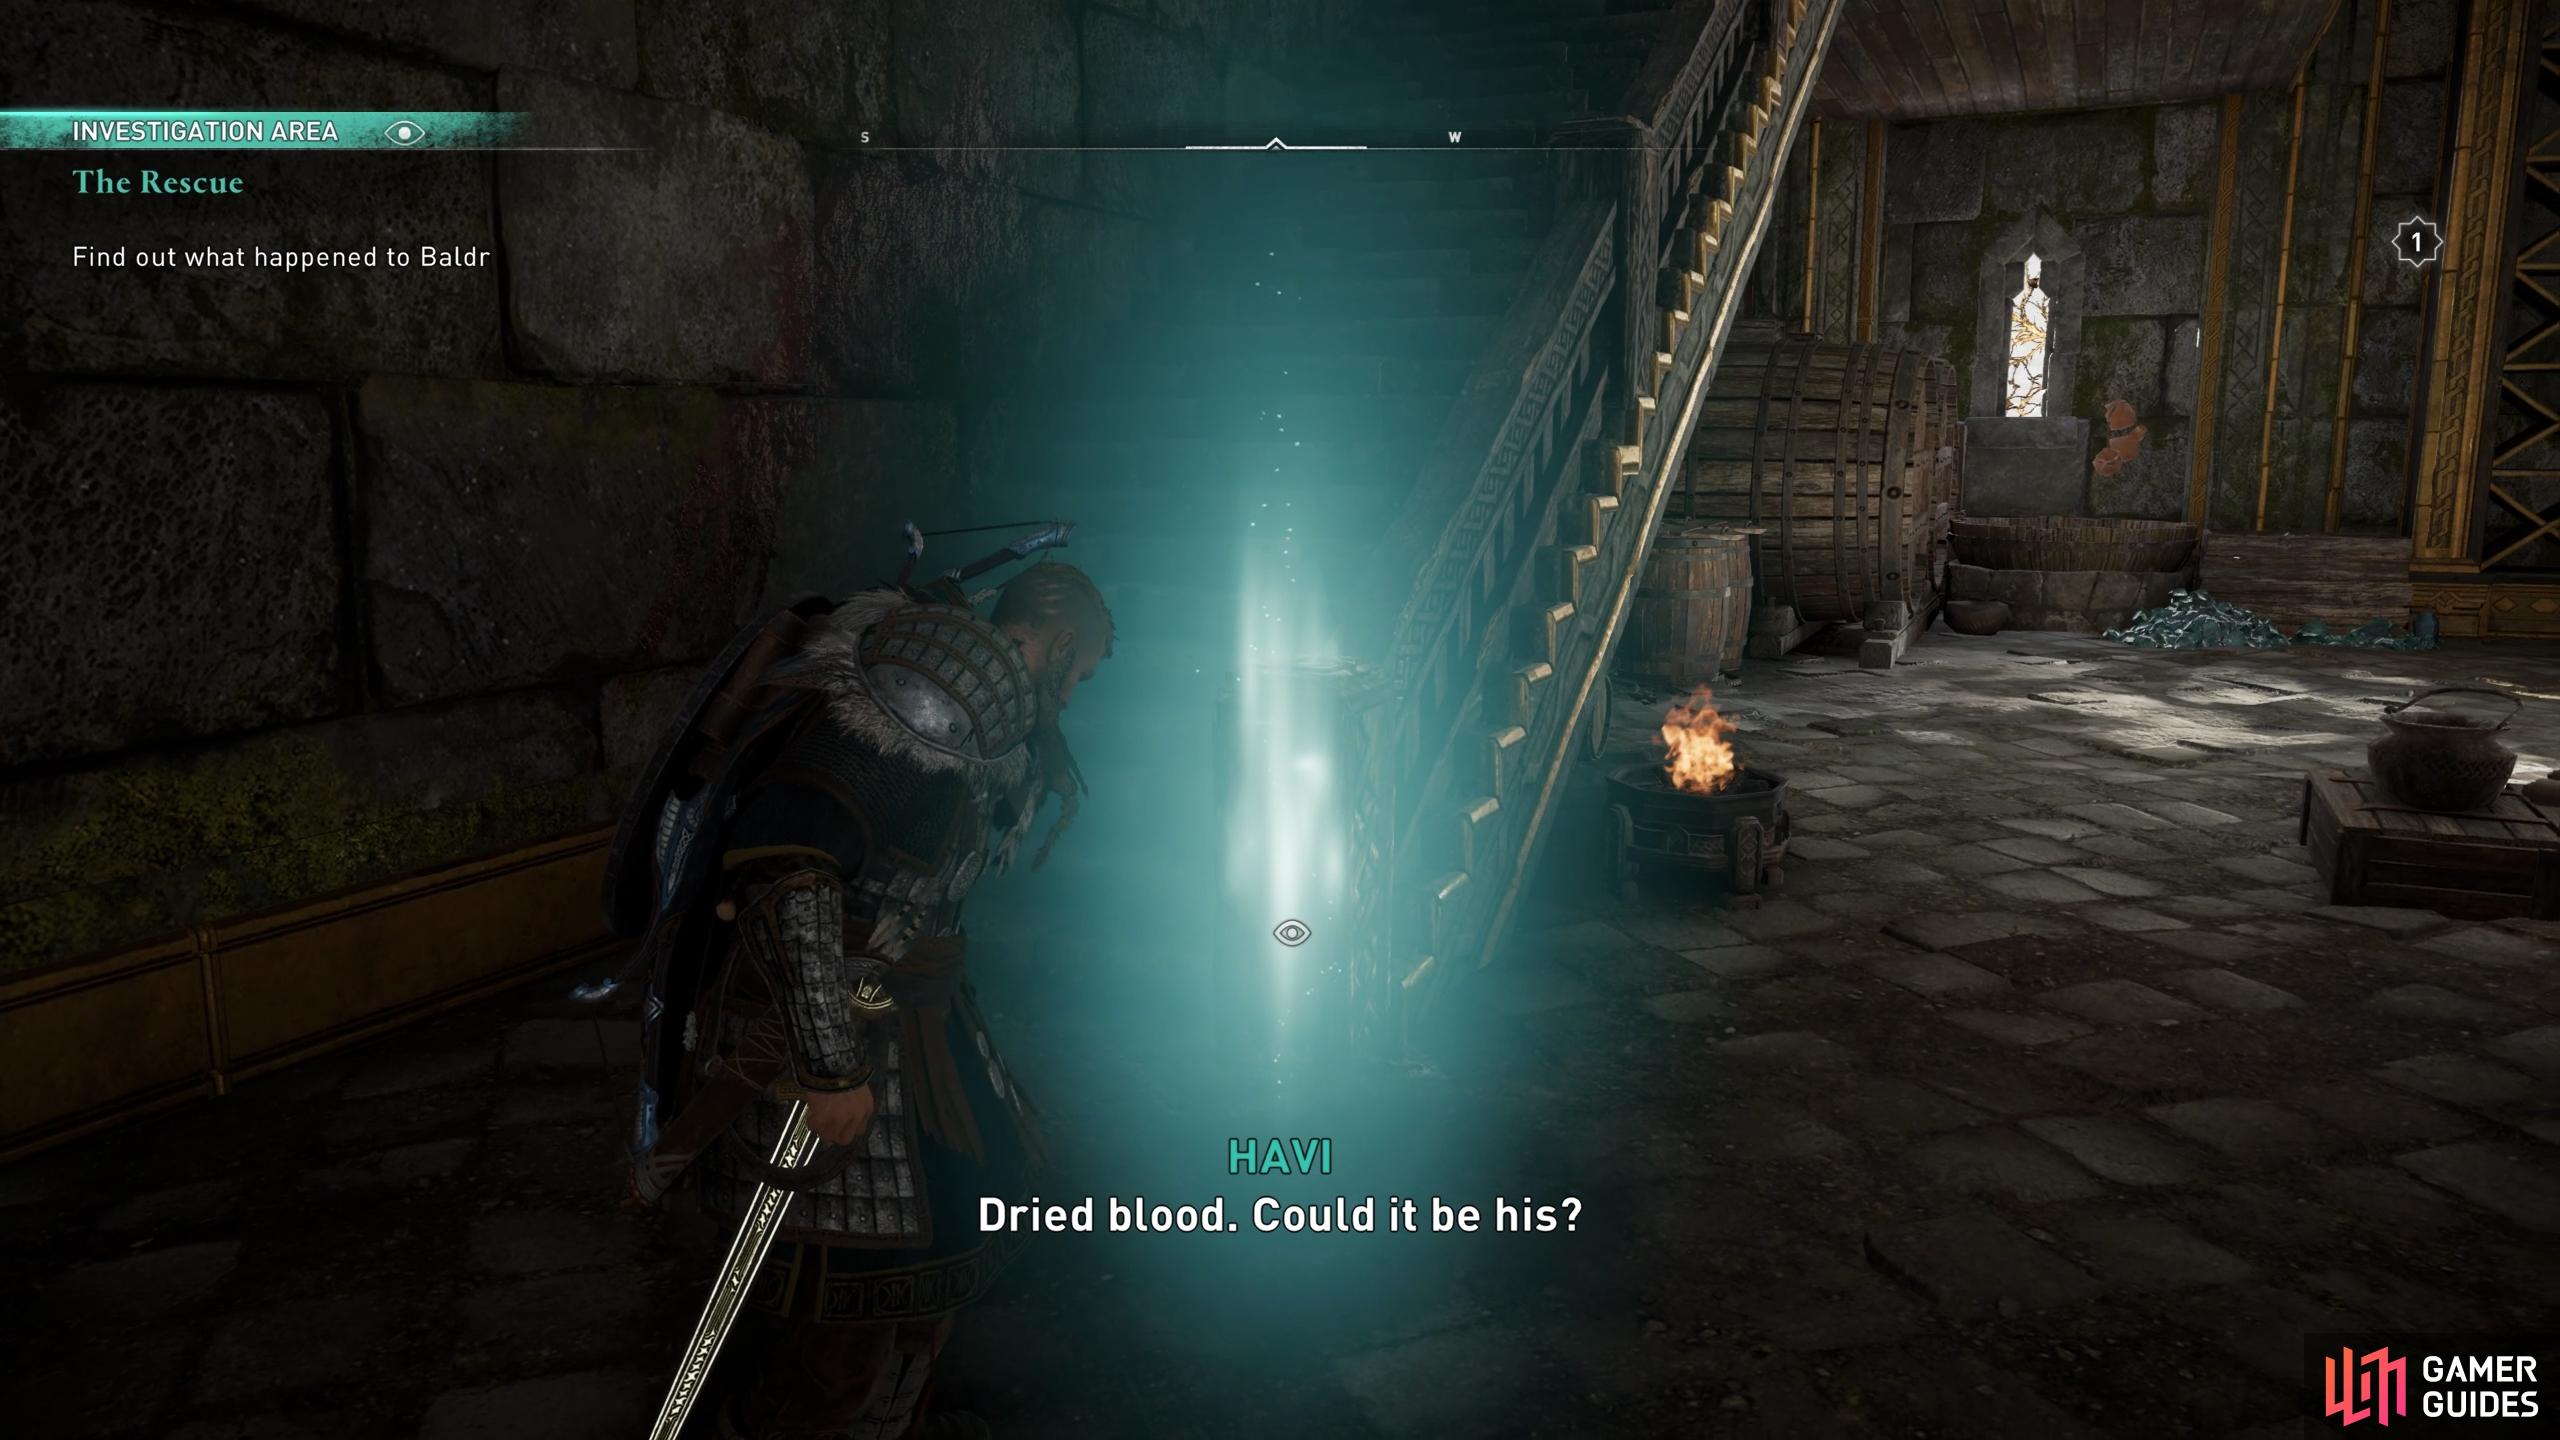 Use Odin's Sight to find the blood at the bottom of the stairs.